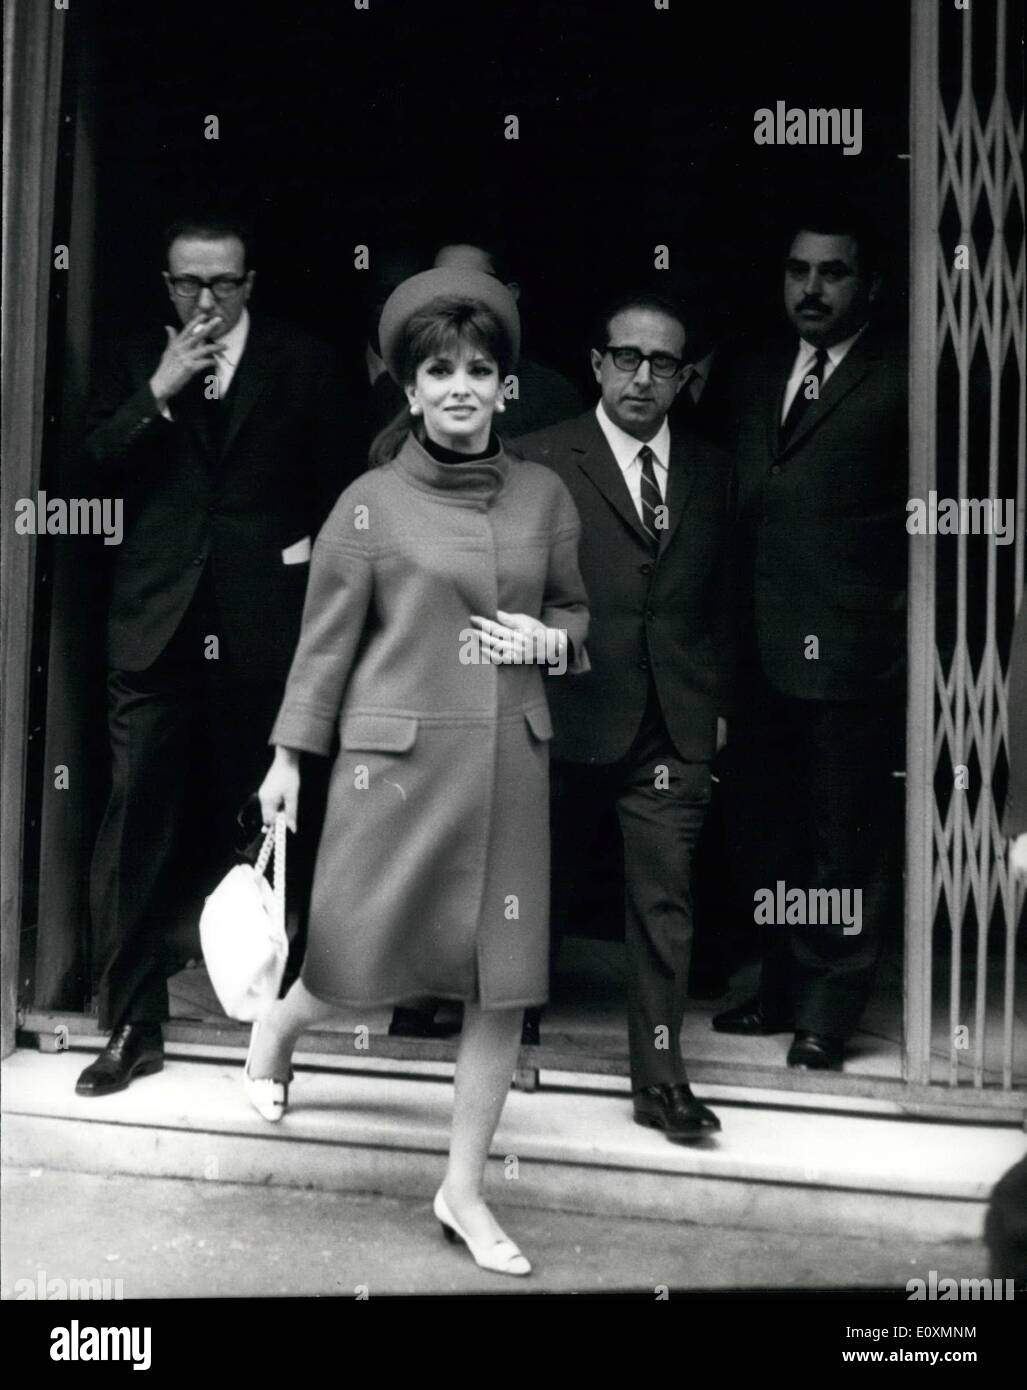 Apr. 04, 1967 - Italian actress Gina Lollobrigida and French actor Jean Sorel went to the Court for the trial of appeal. They are accused to work in the film ''Le Bam bole'' (the dolls), in a scene considered immoral by the Court. The first court condamned them to two months of reclusion. Photo shows Gina leaves the Cine Ariston where the Court watched the incriminated scenes of the film. Gina is accompanied by her lawyer Bavaro. Stock Photo